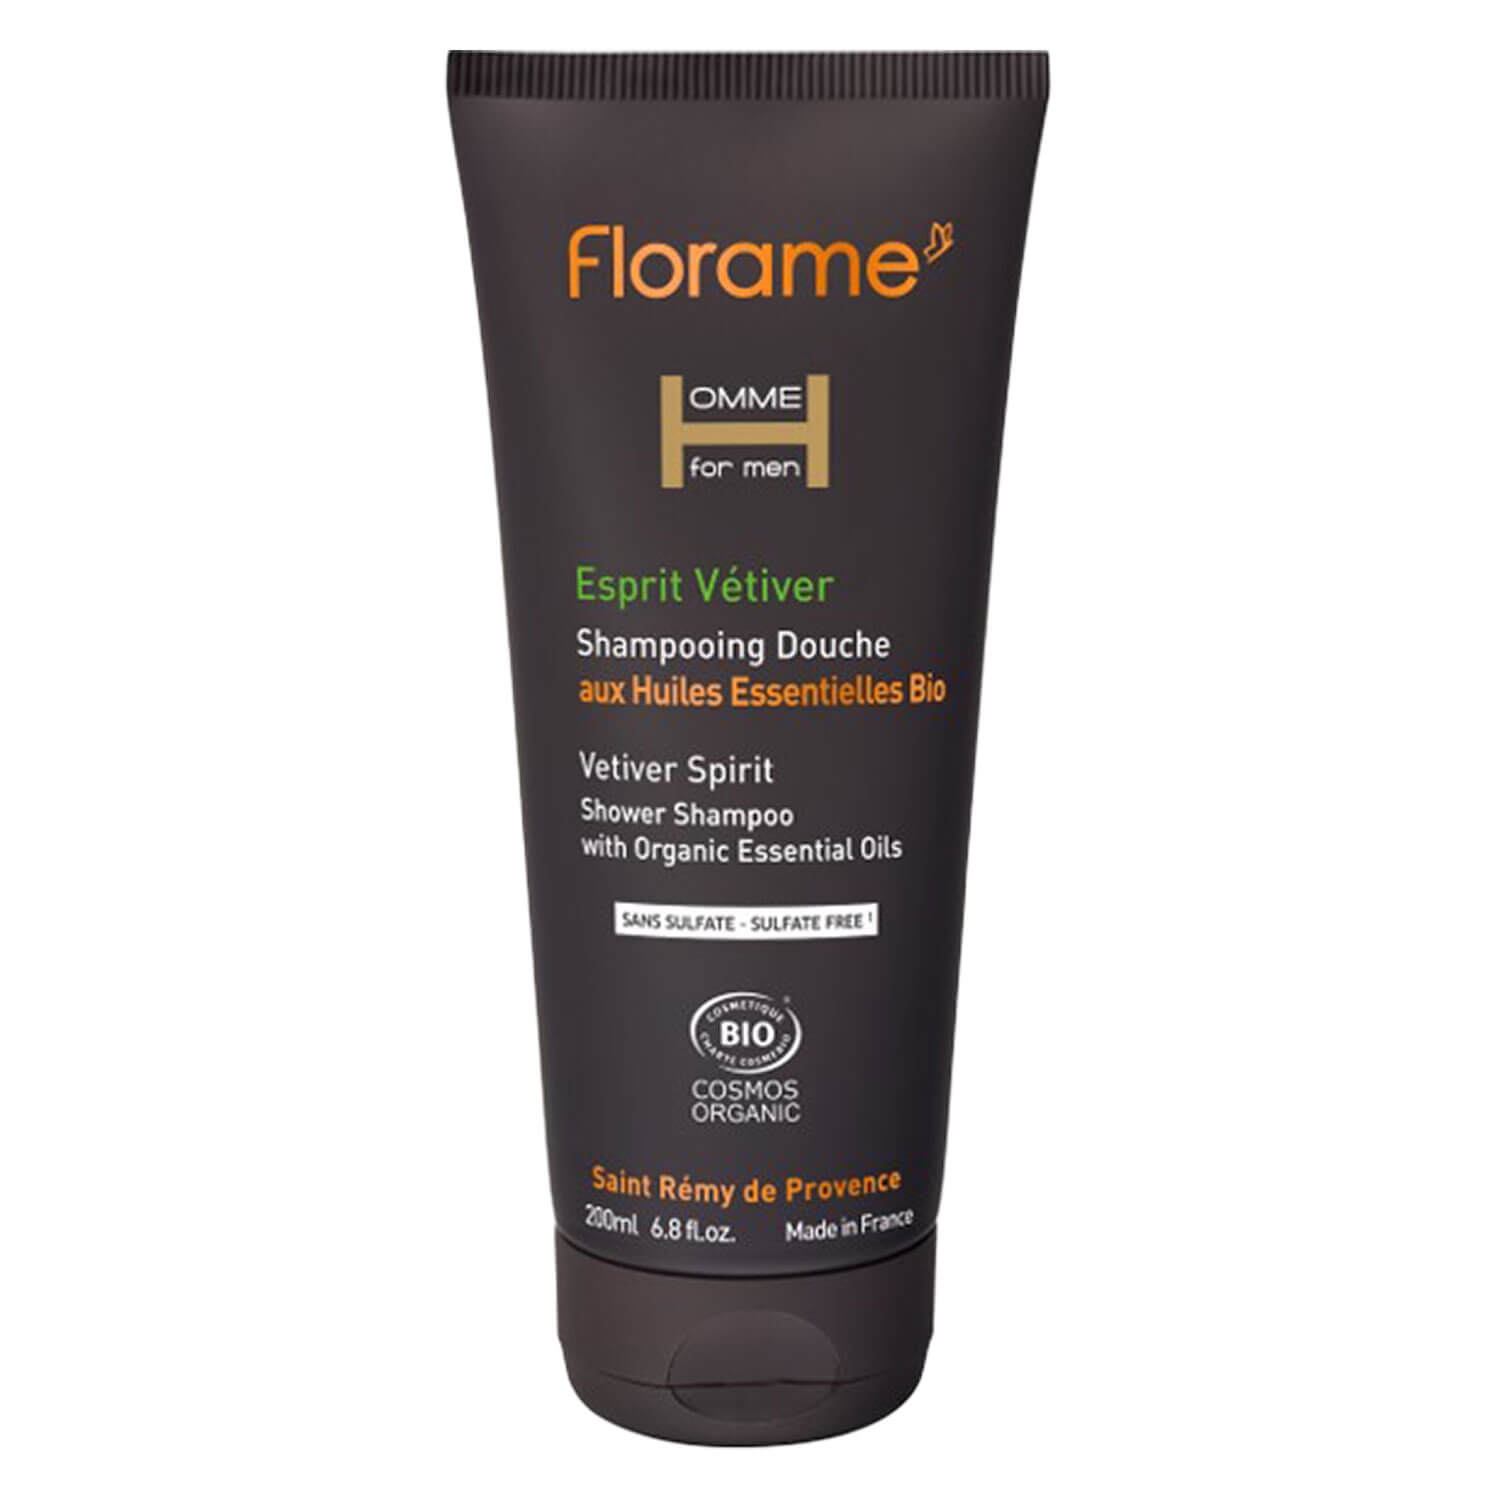 Product image from Florame Homme - Vetiver Spirit Shower Shampoo